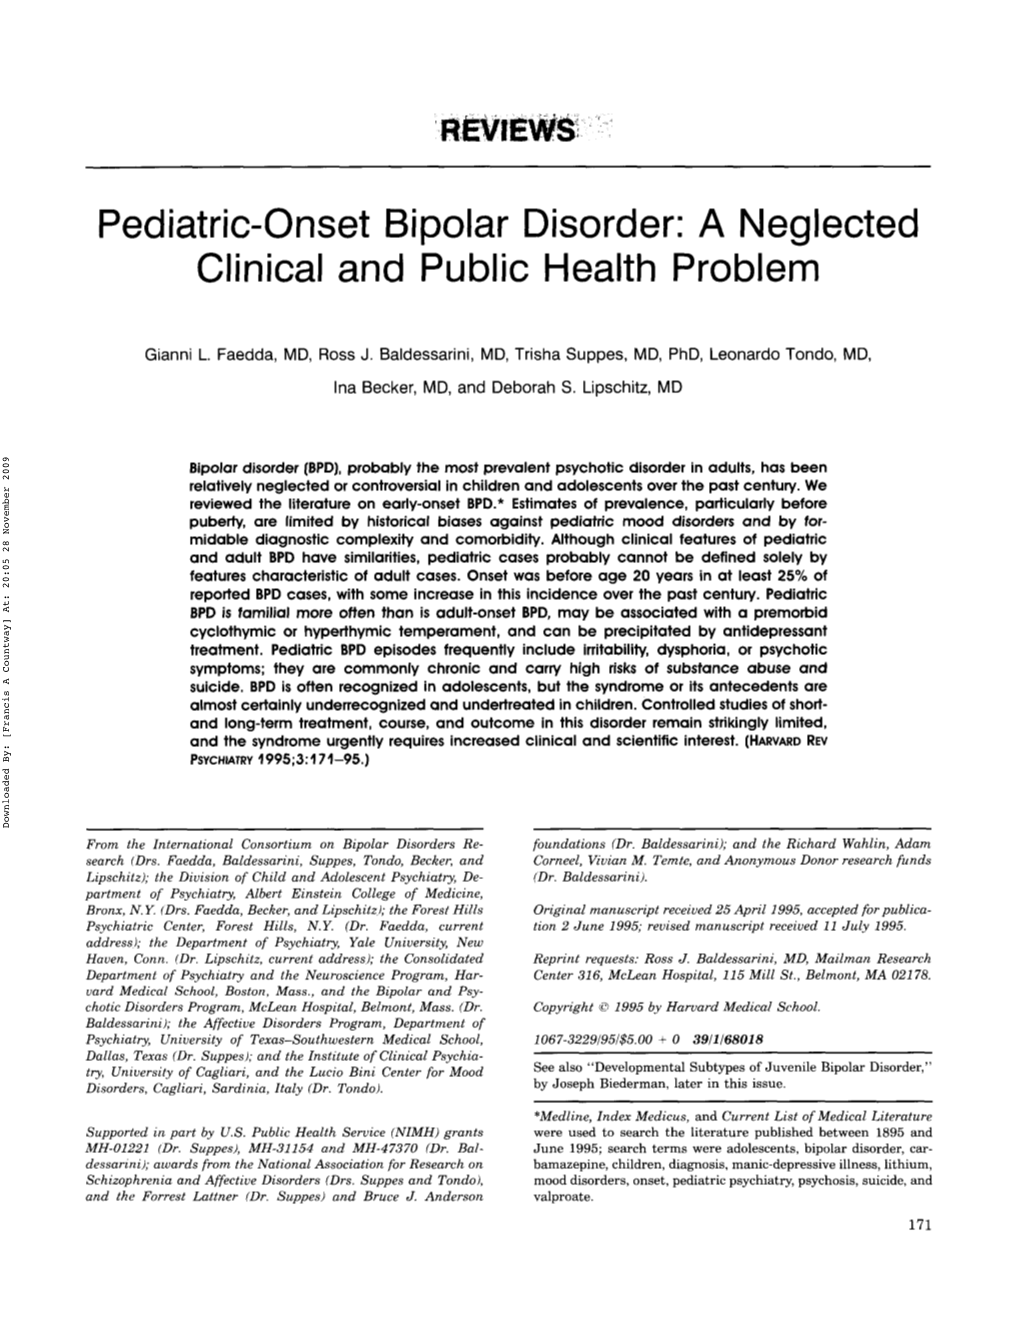 Pediatric-Onset Bipolar Disorder: a Neglected Clinical and Public Health Problem